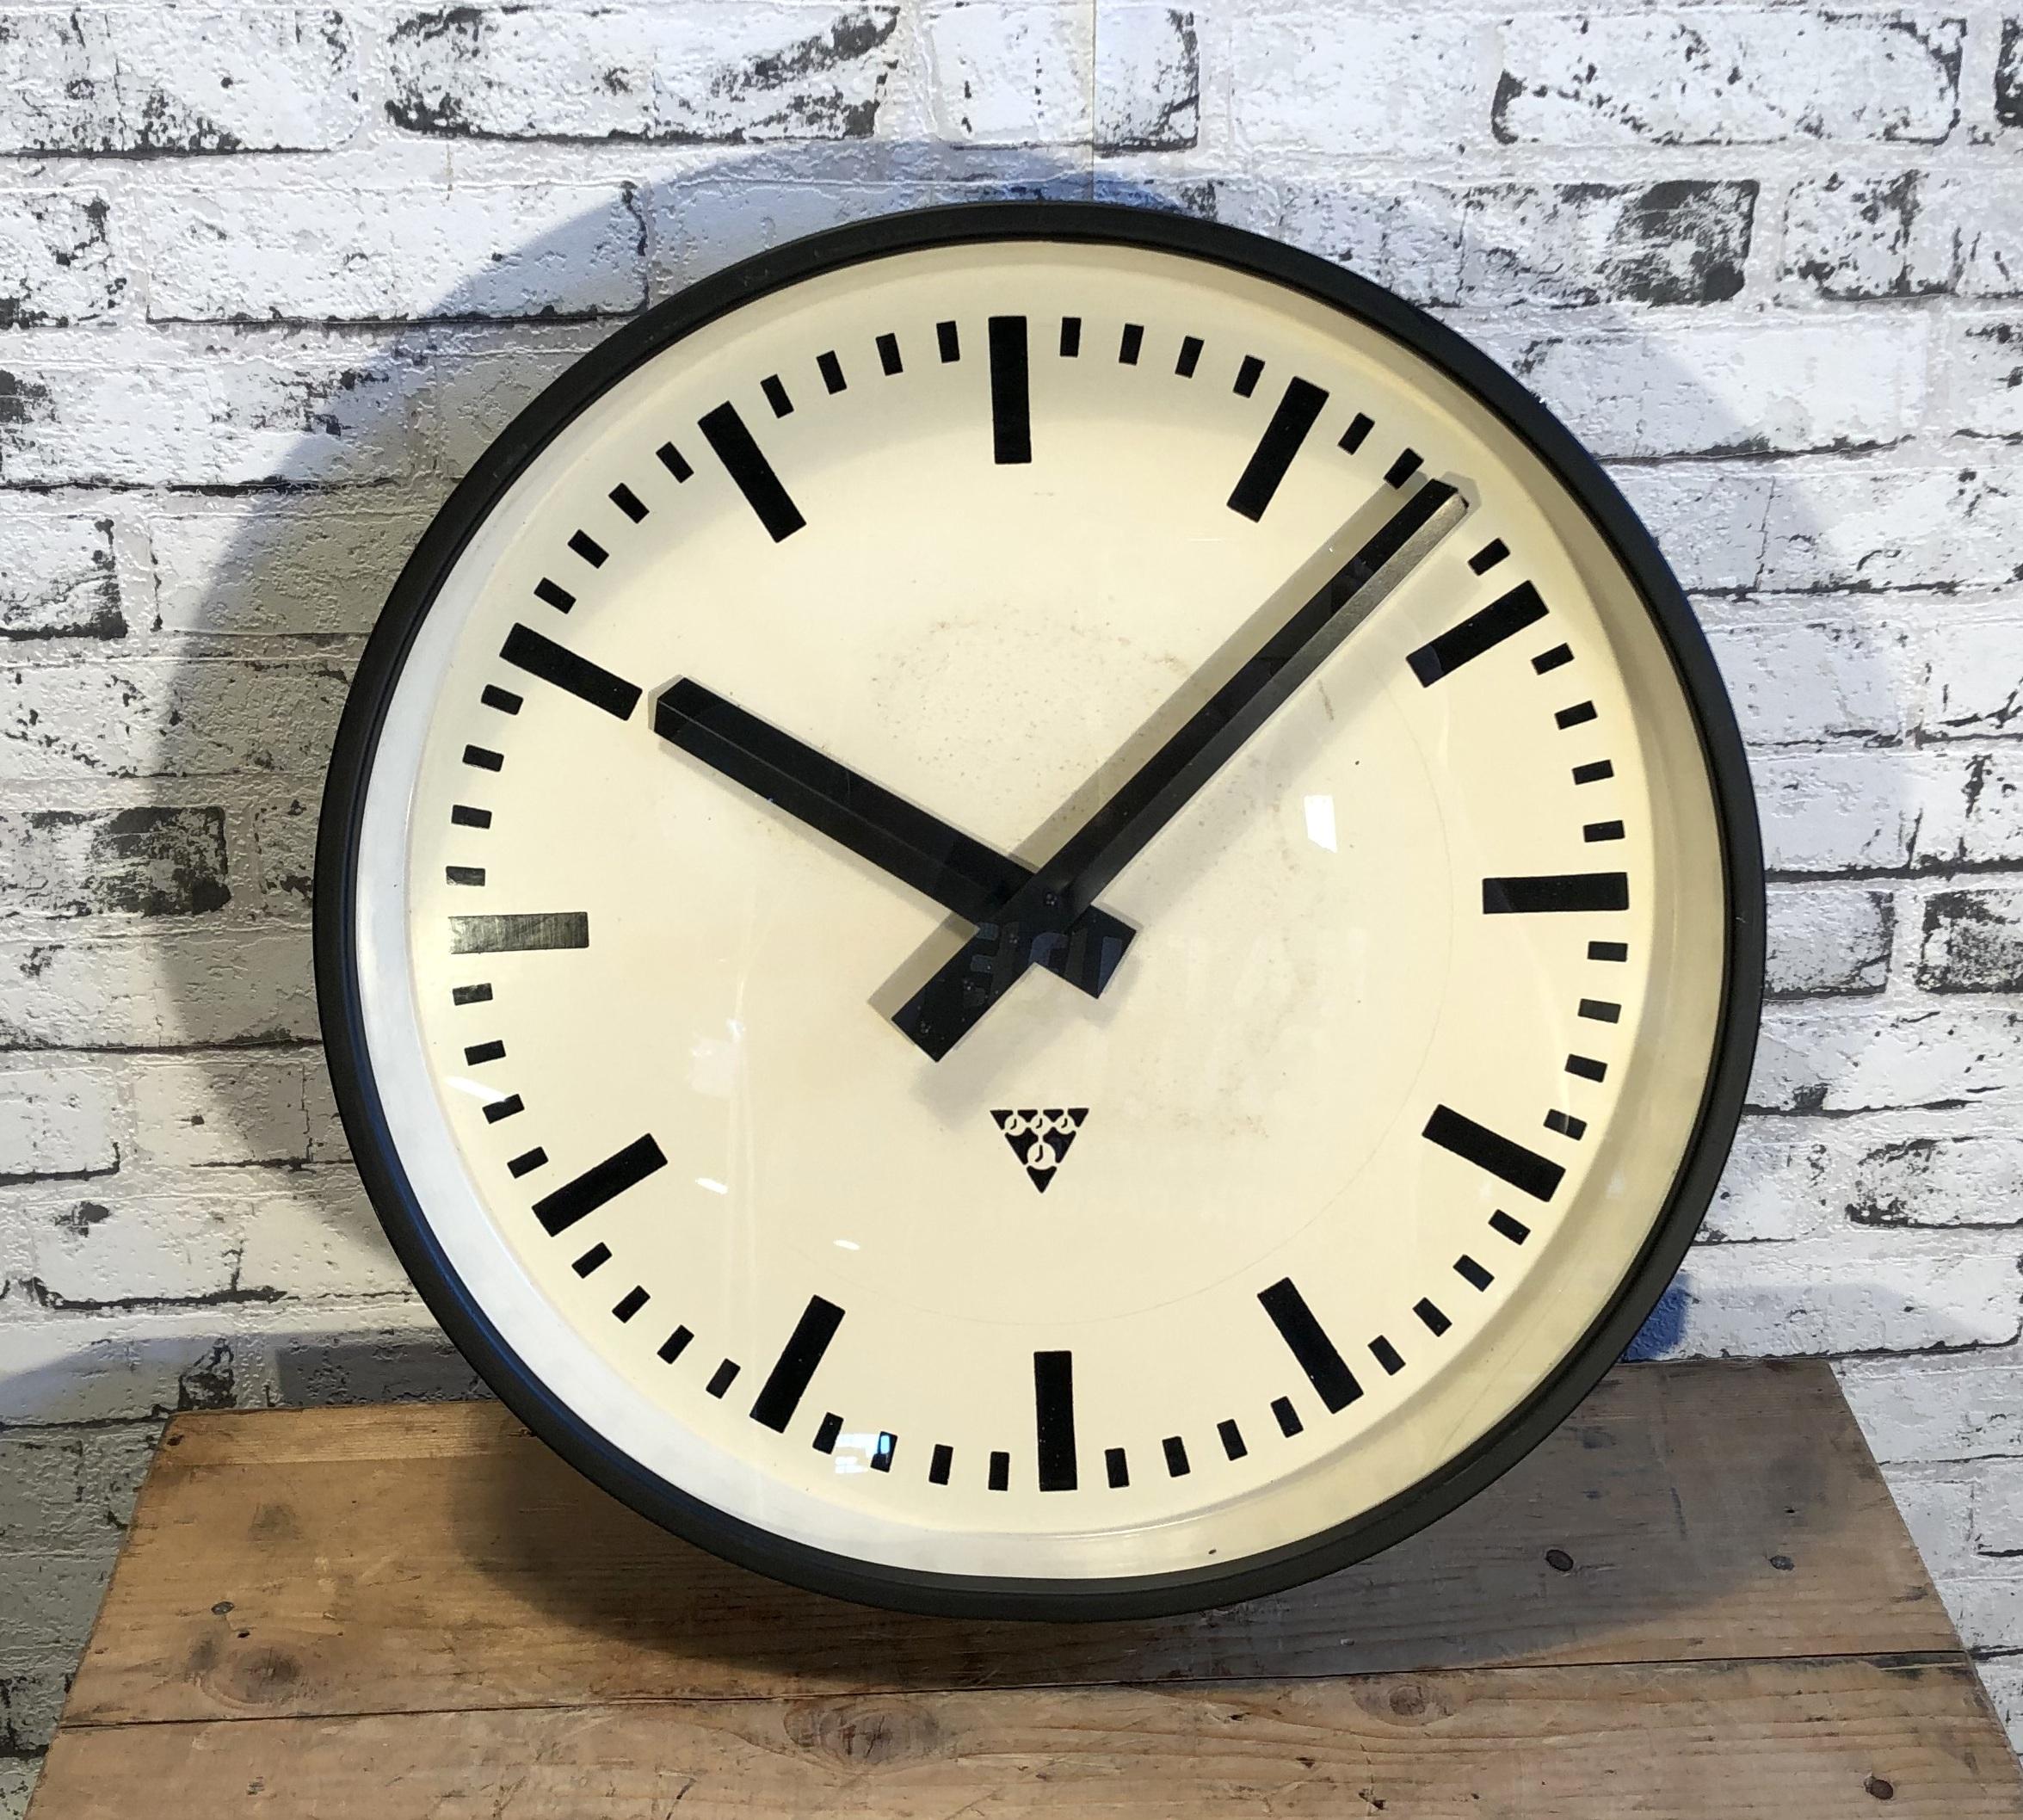 Pragotron wall clock made in former Czechoslovakia during the 1960s. It Features a black metal frame, metal dial and clear glass cover. The piece has been converted into a battery-powered clockwork and requires only one AA-battery. Measure: Diameter